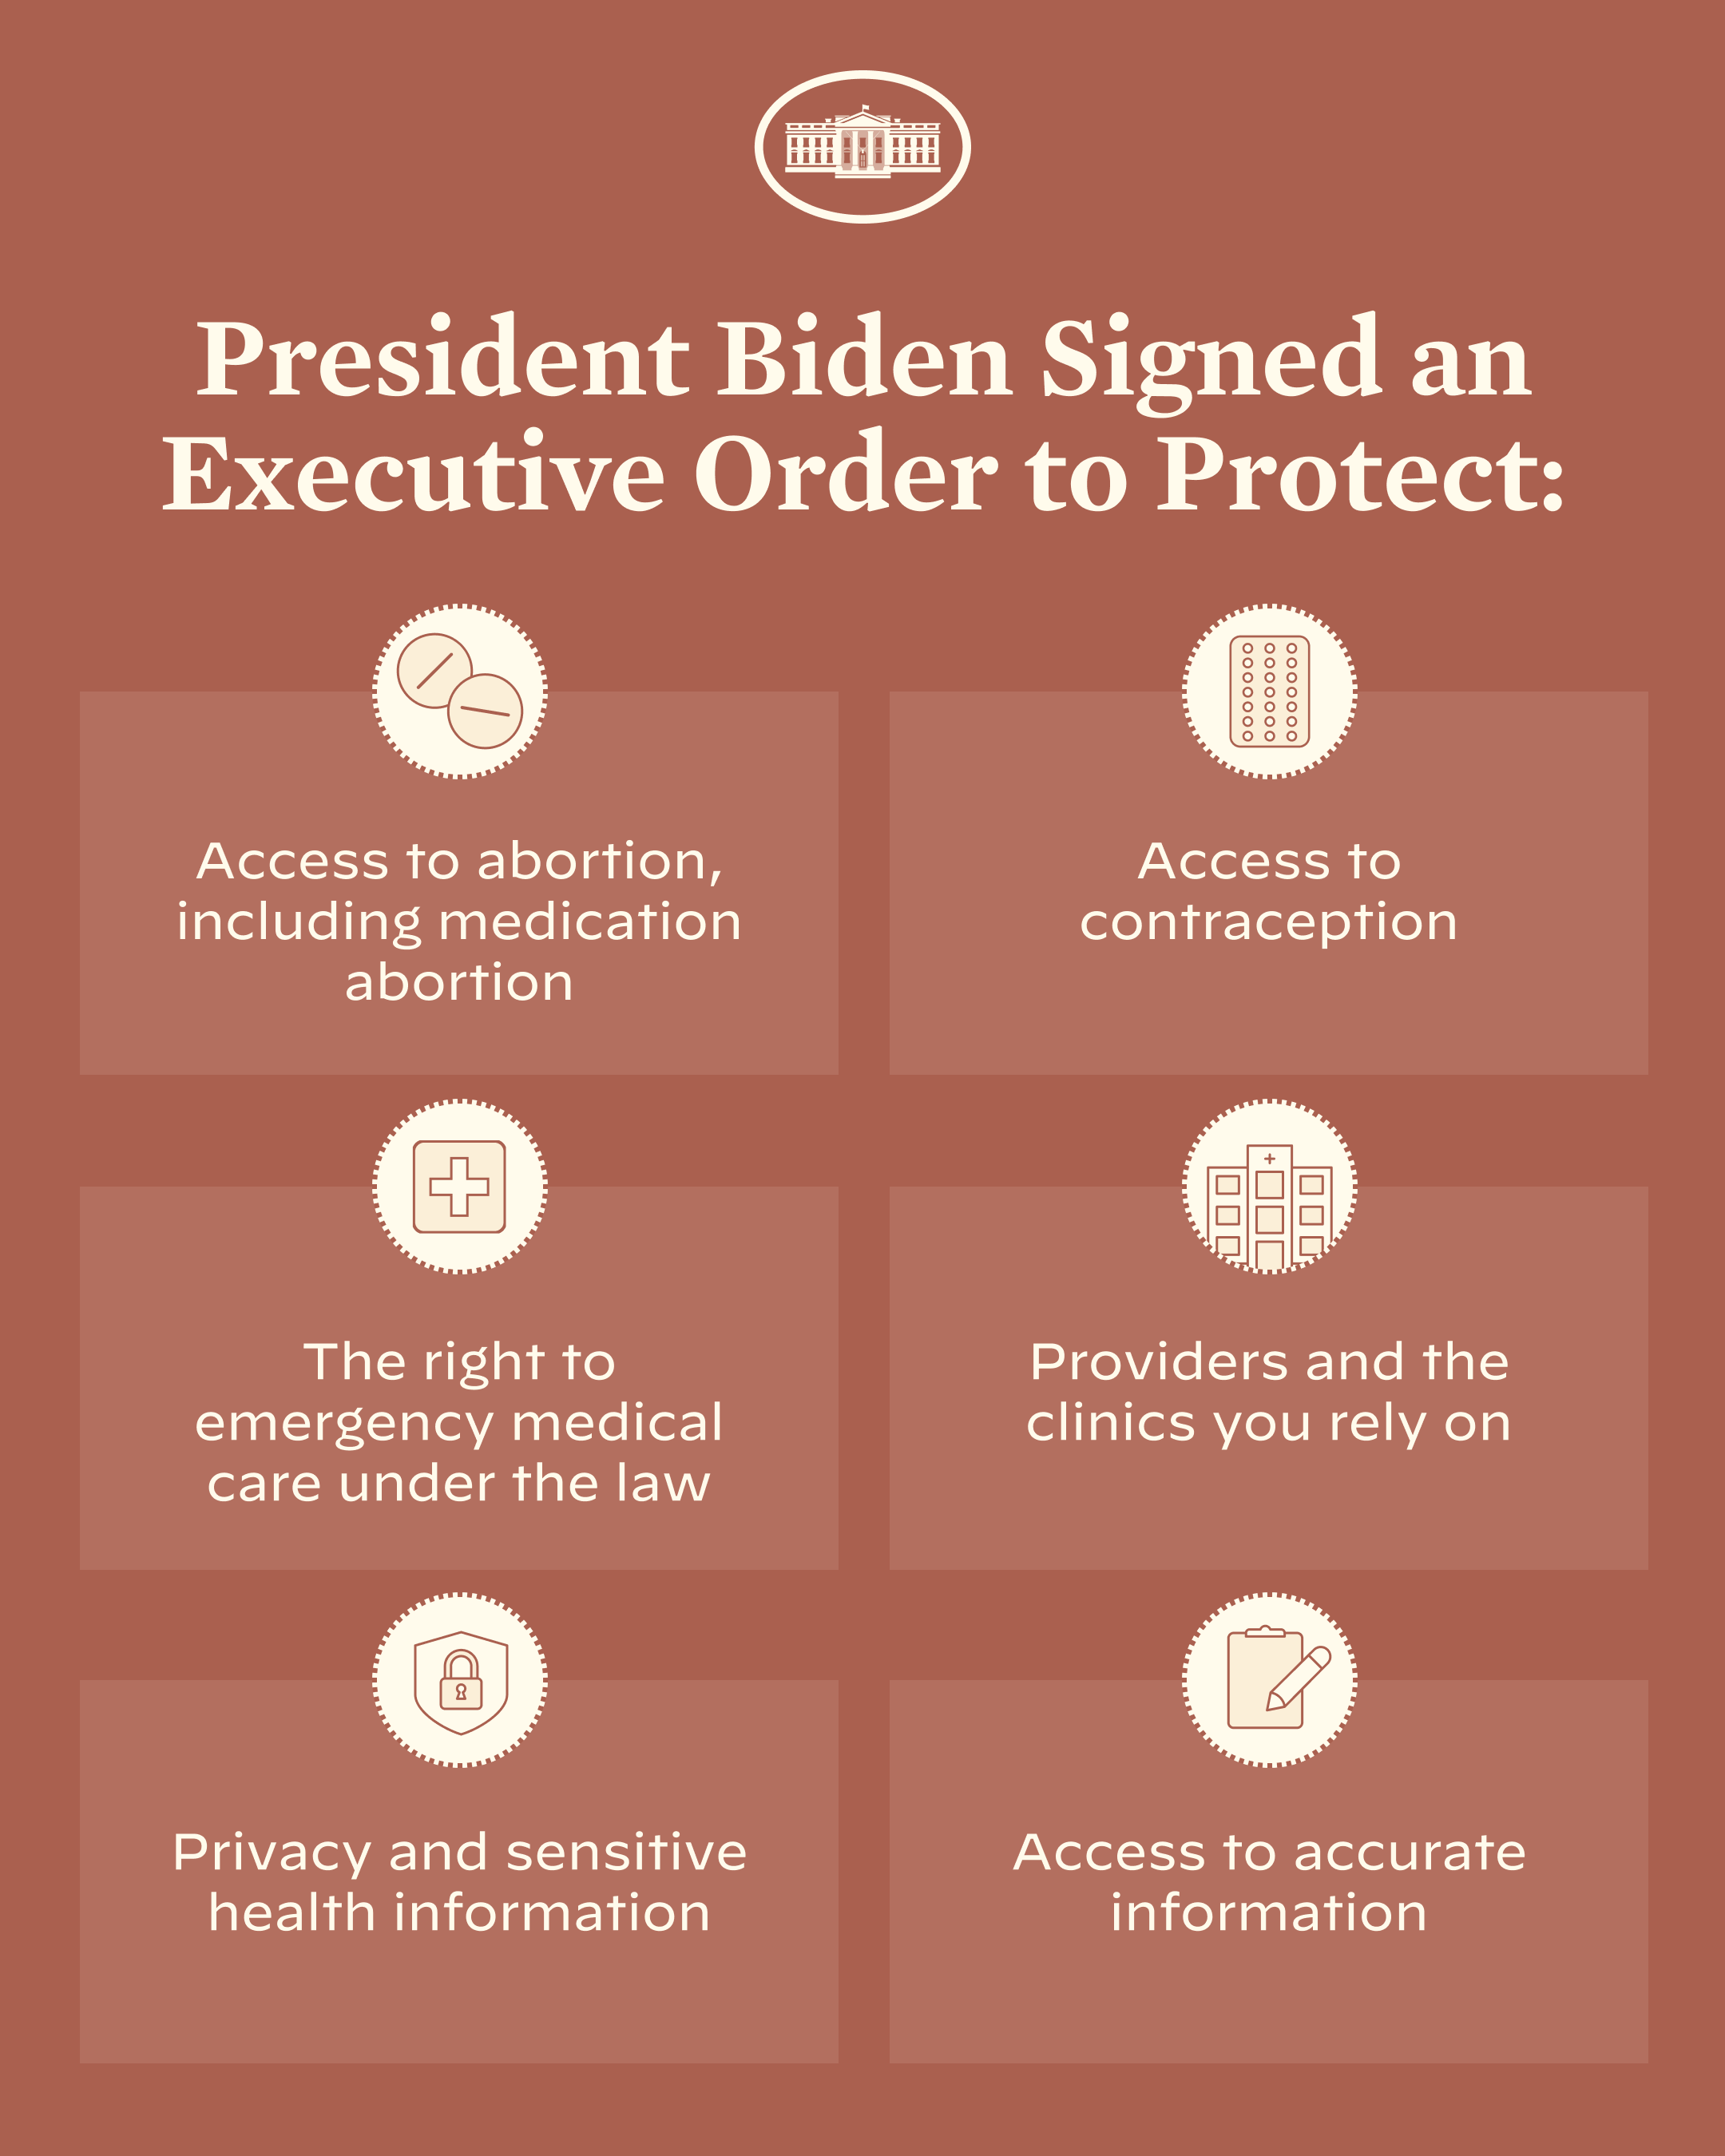 President Biden Signed an Executive Order to Protect: -Access to abortion, including medication abortion -Access to contraception -The right to emergency medical care under law -Providers and the clinics you rely on -Privacy and sensitive health information -Access to accurate information